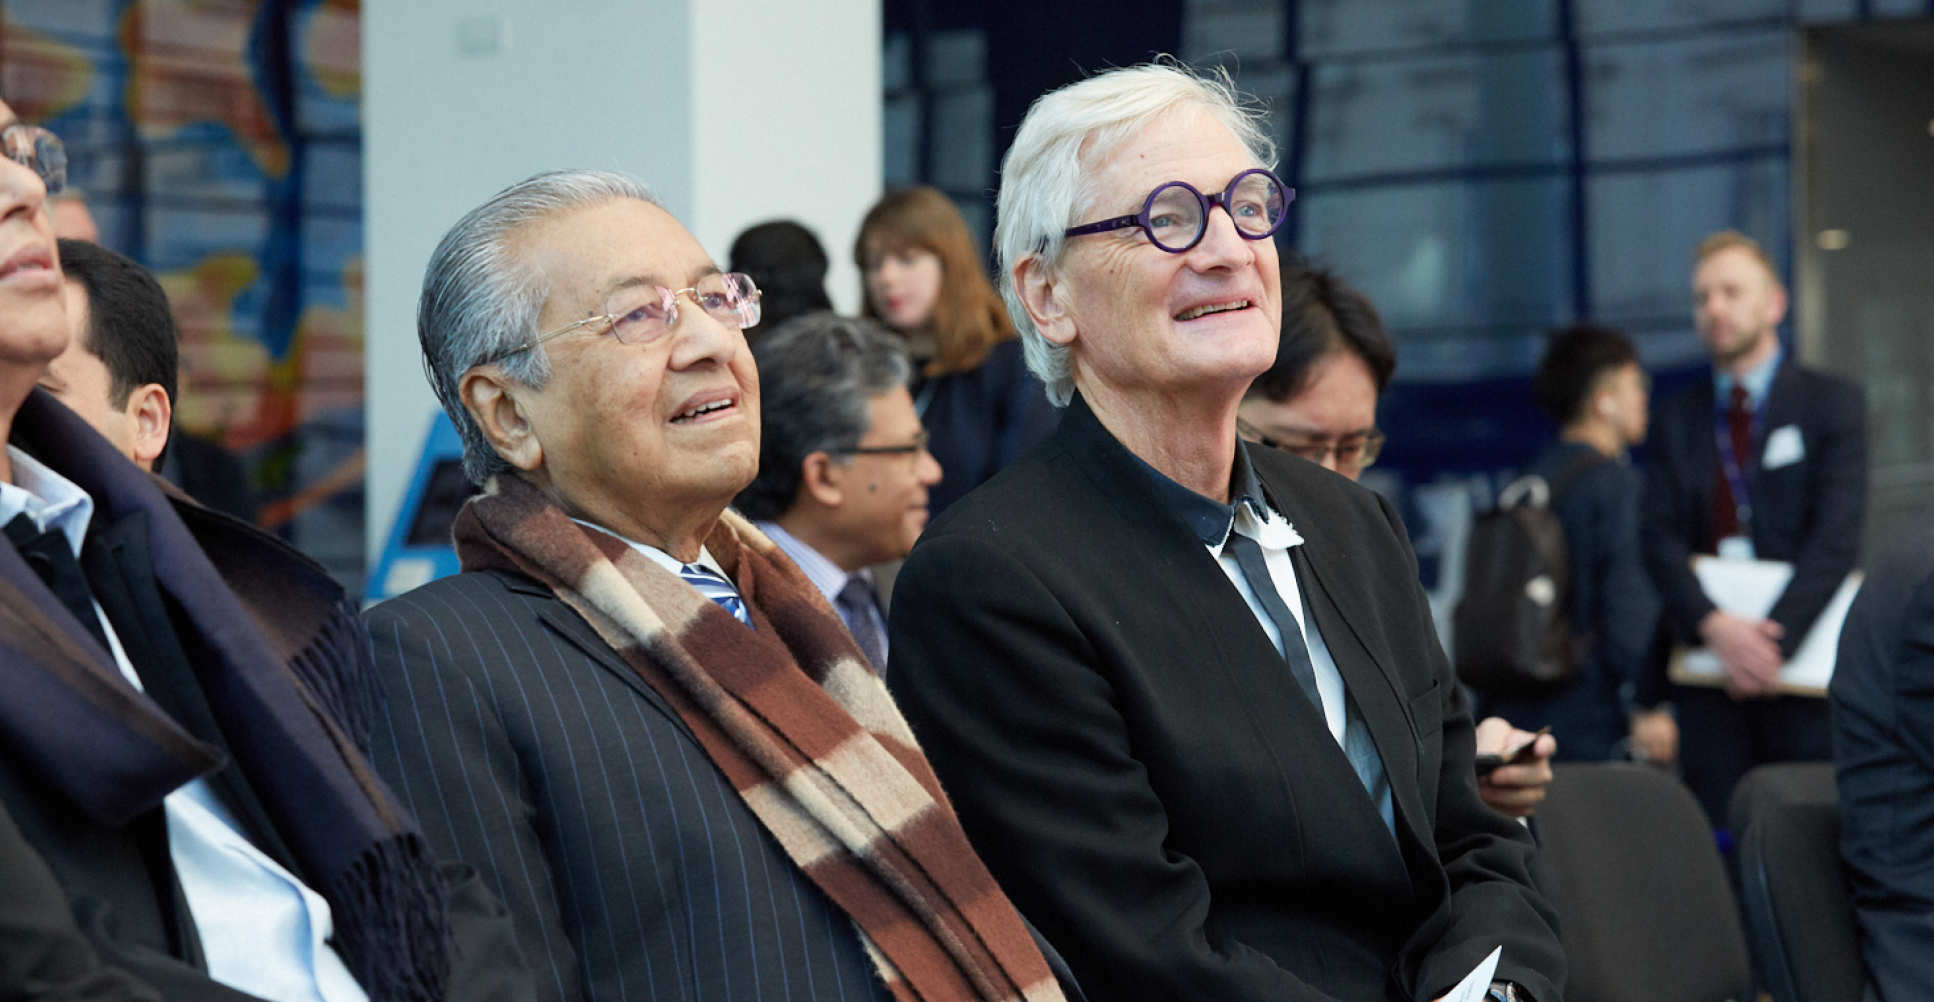 Prime Minister Tun Dr Mahathir bin Mohamad with Sir James Dyson at Imperial